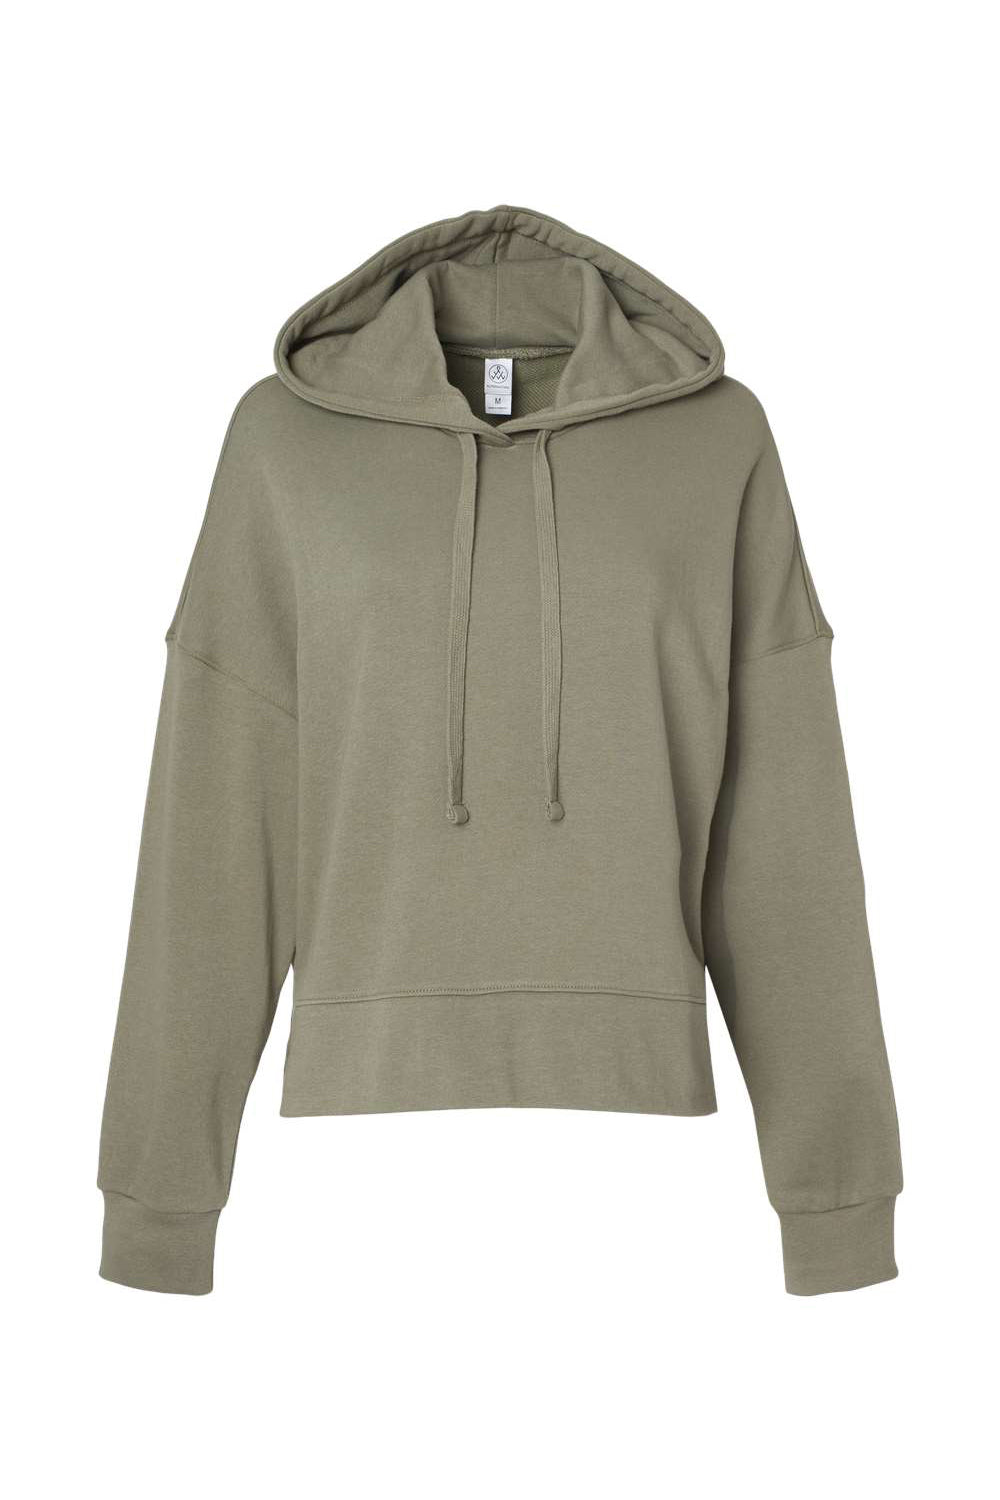 Alternative 9906ZT Womens Eco Washed Hooded Sweatshirt Hoodie Military Green Flat Front